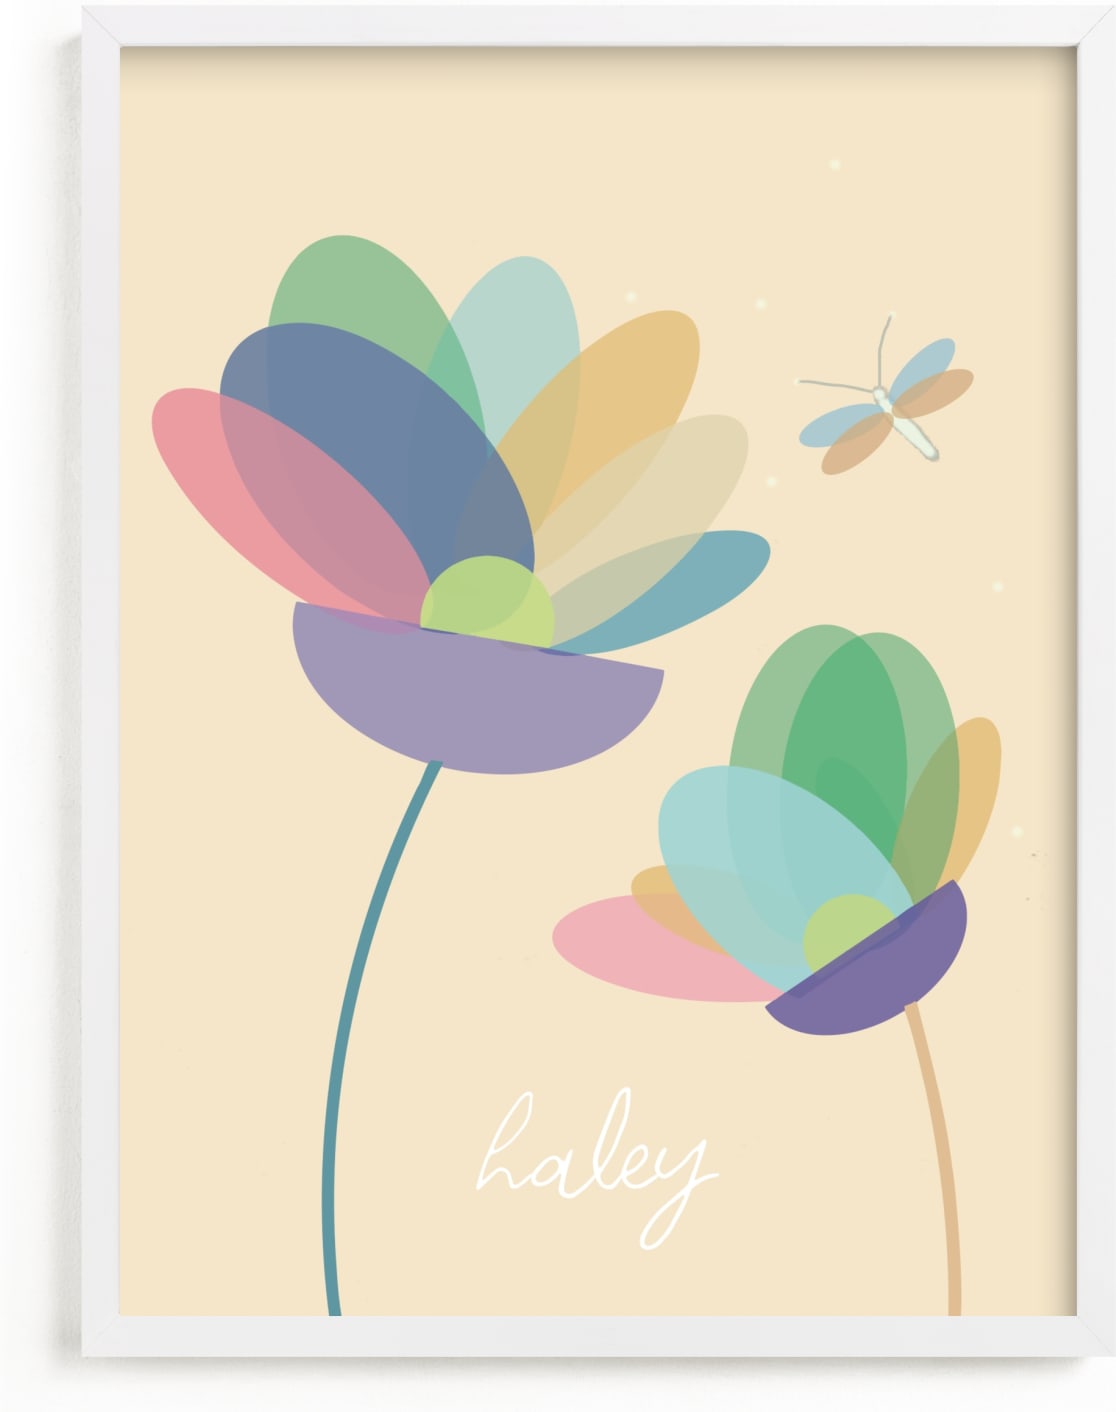 This is a colorful personalized art for kid by AlisonJerry called Modern Floral.